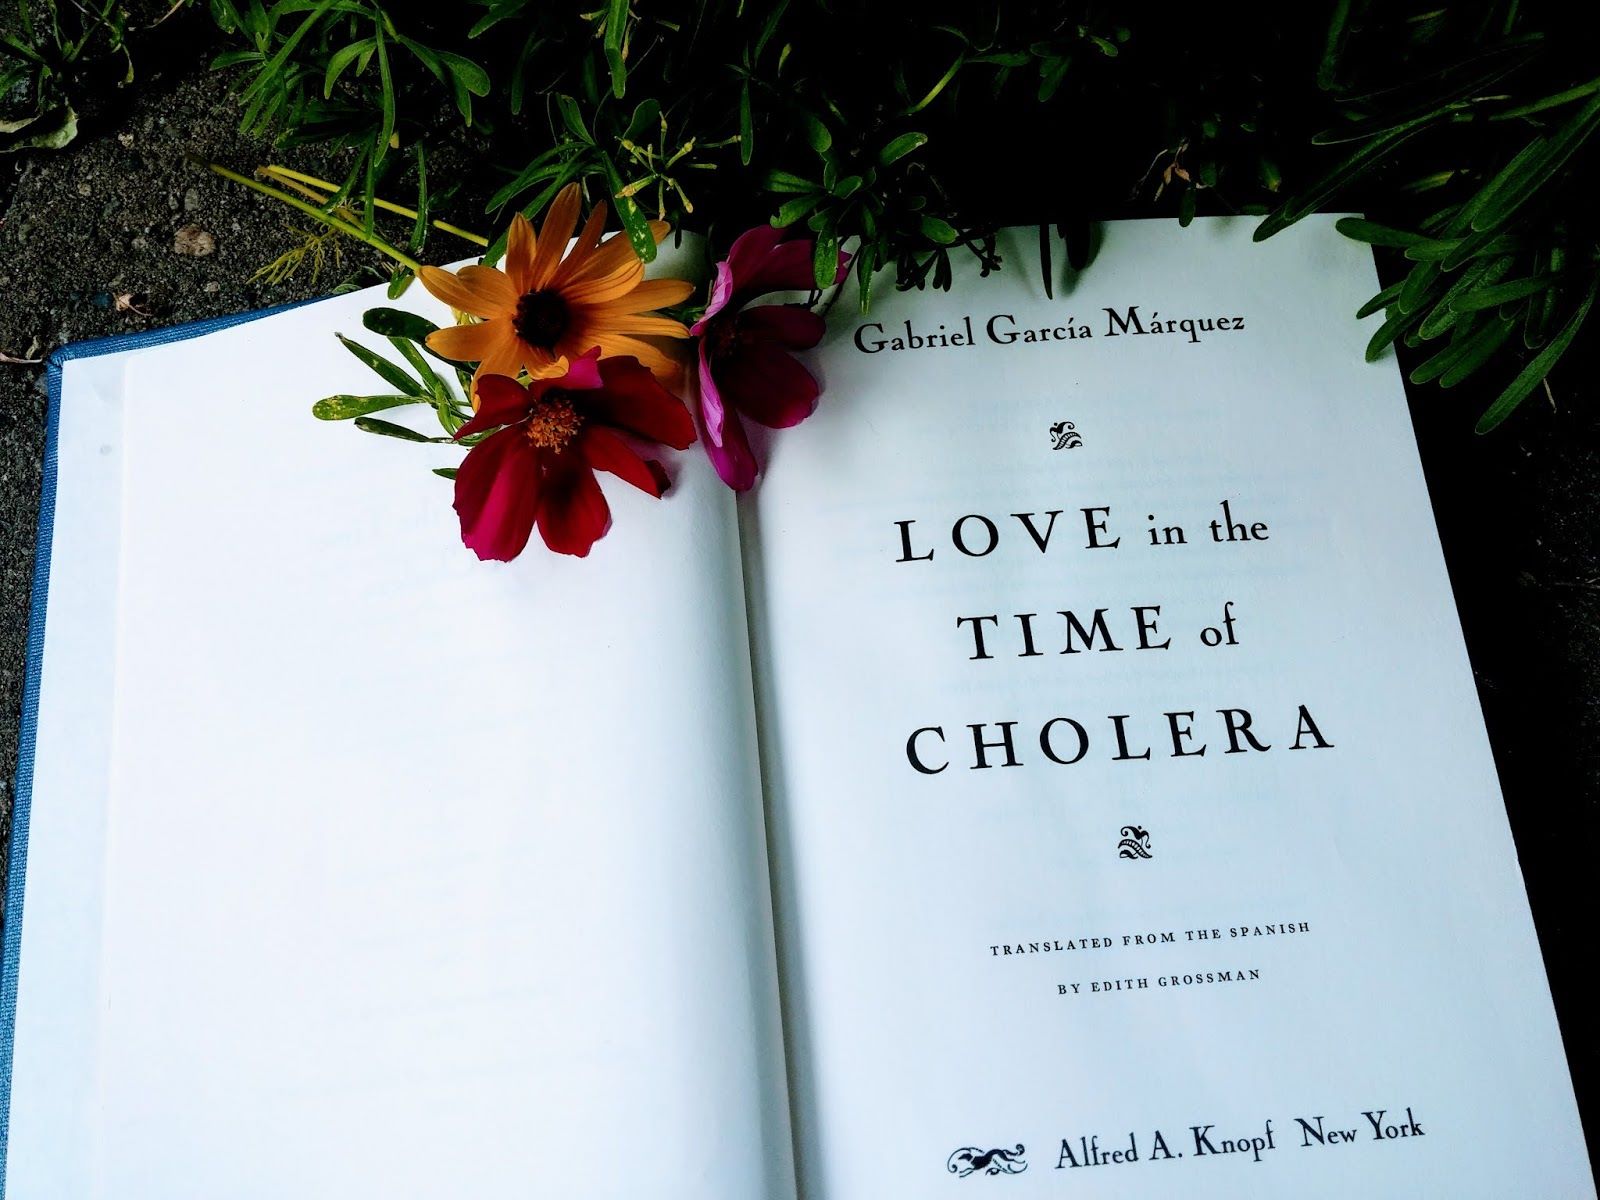 19-astounding-facts-about-love-in-the-time-of-cholera-gabriel-garcia-marquez